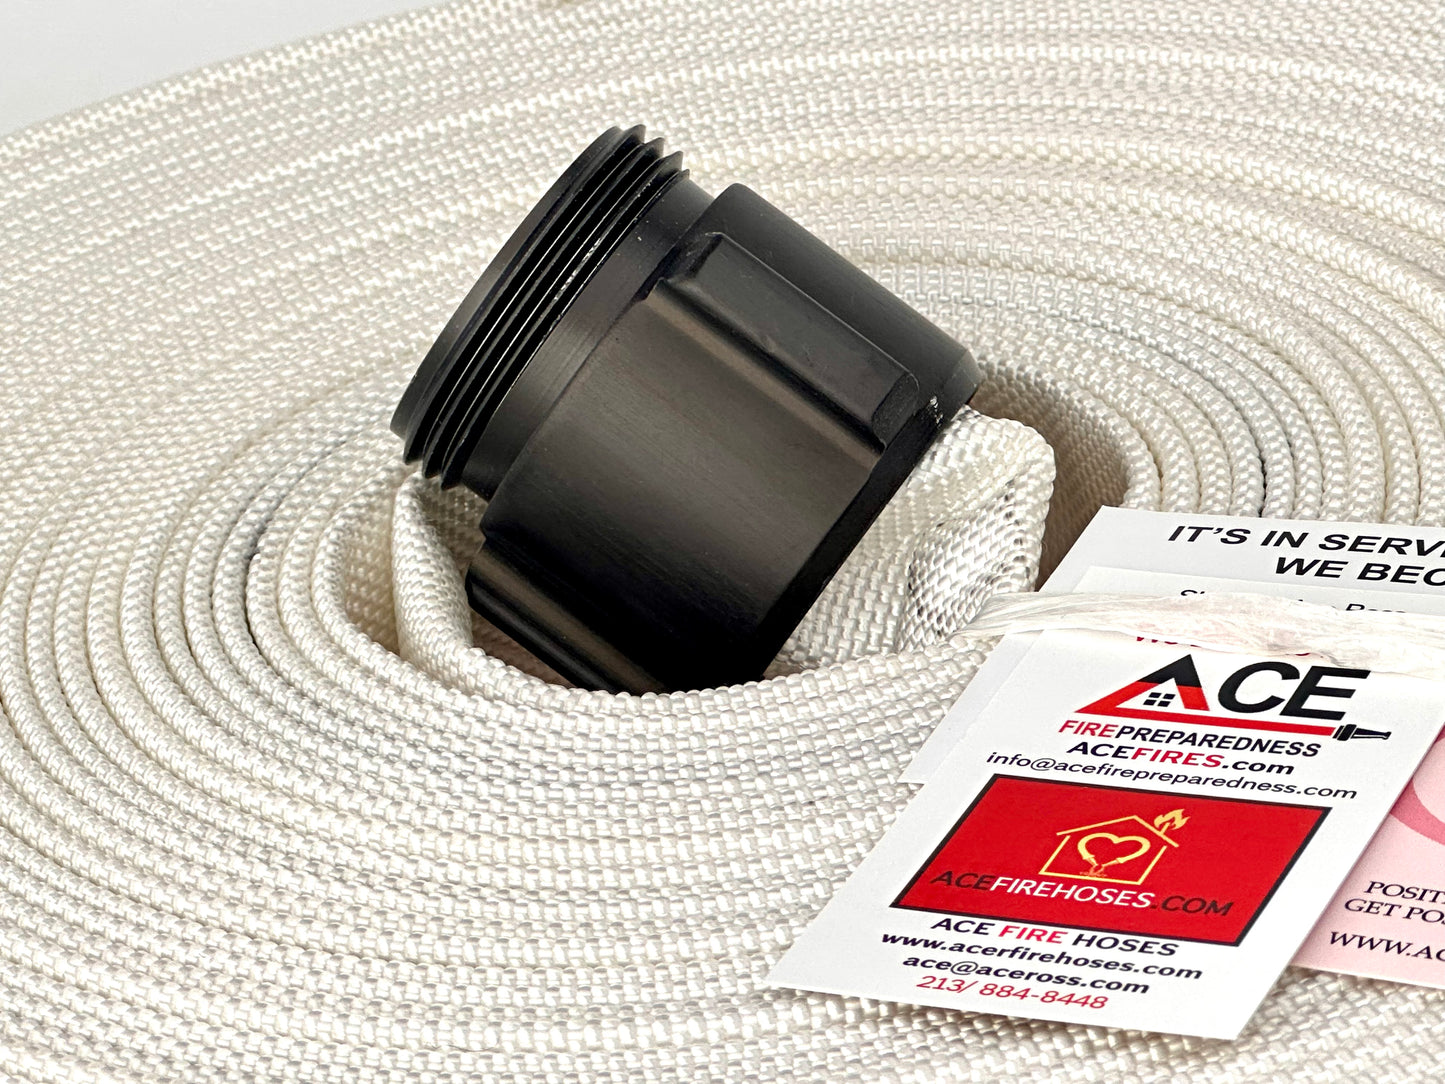 Fire Hose new improved Coiled, Pyro-Lite Aluminum Couplings, 75' x 1.5" TPU Lining, FM Approved.